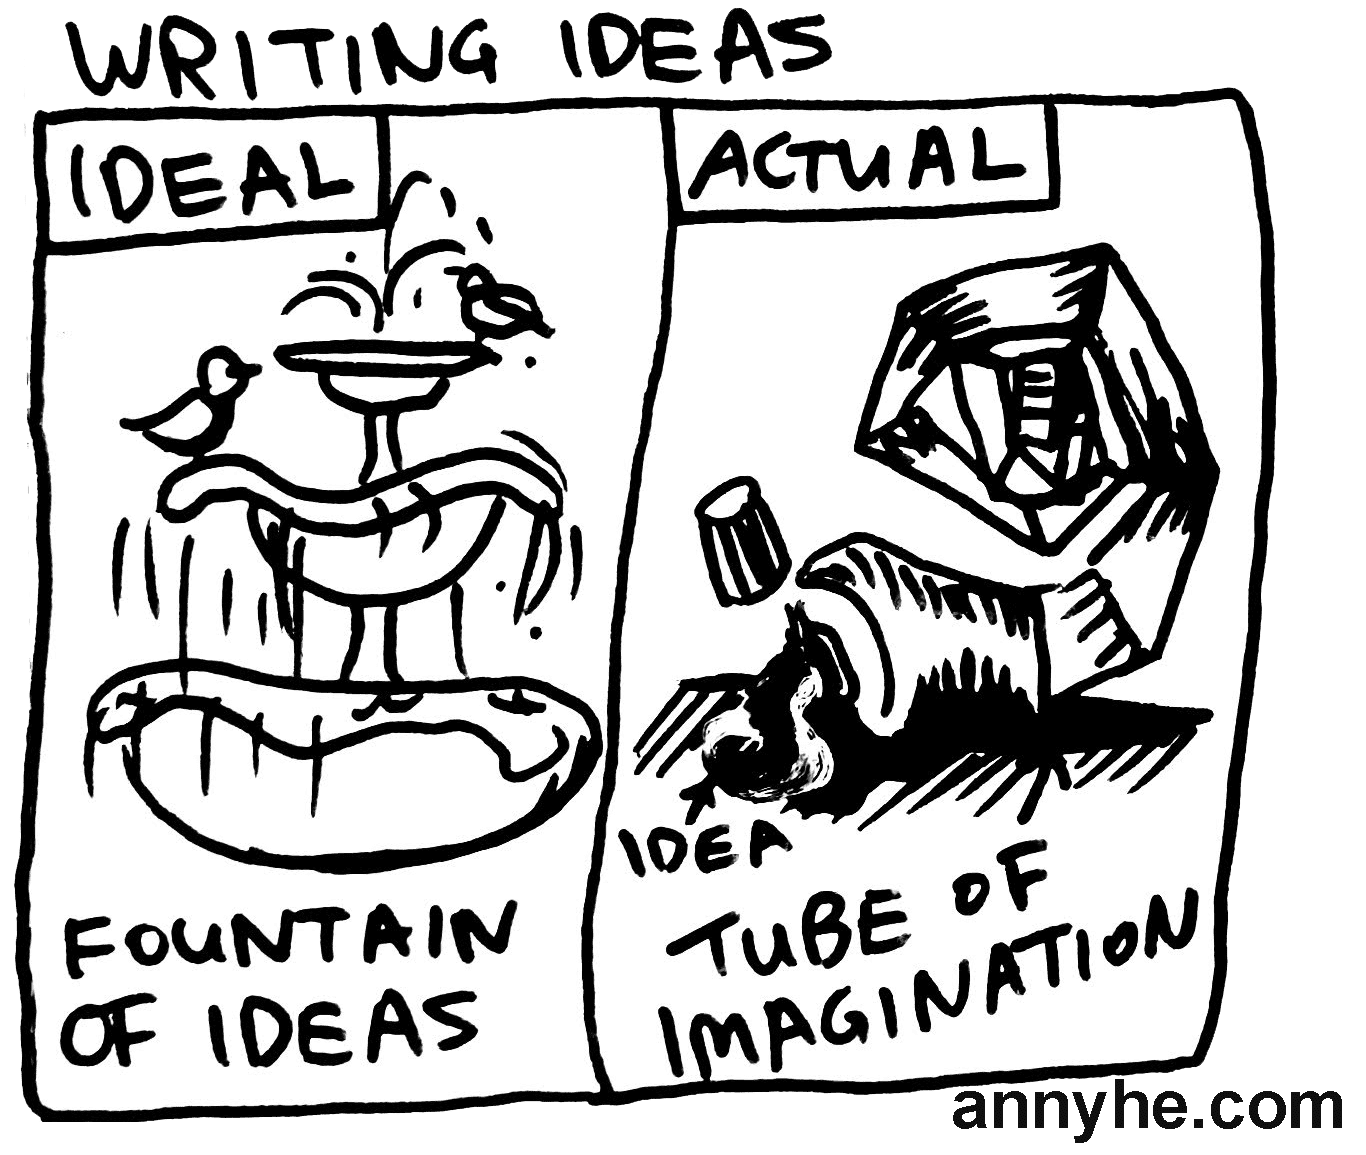 Writing Ideas - Ideal vs Actual